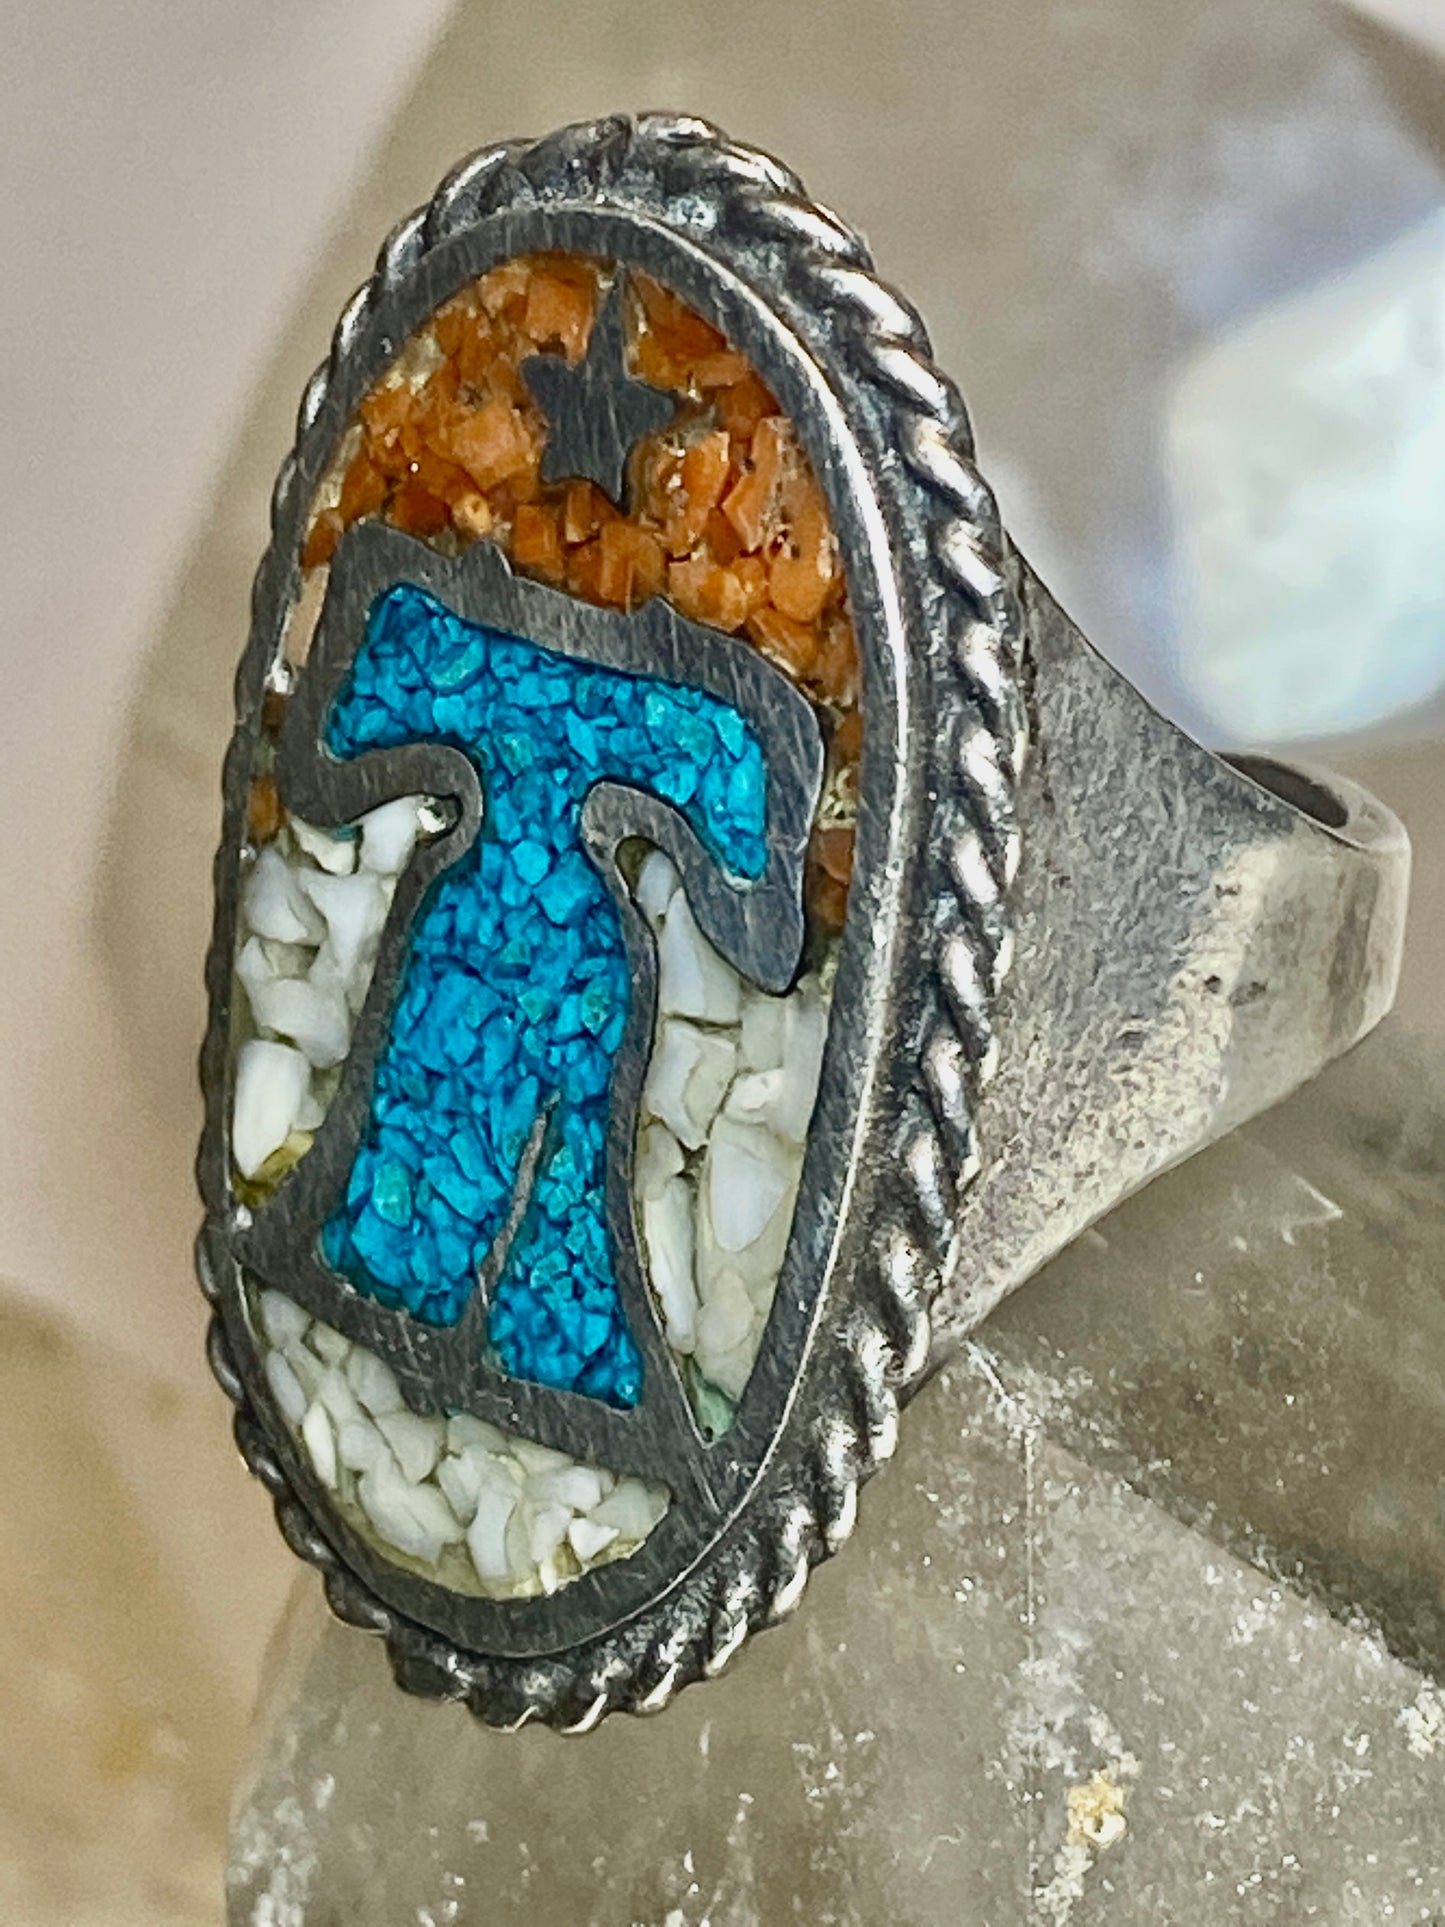 Liberty Bell ring size 8 turquoise chips coral Independence July 4 sterling silver women